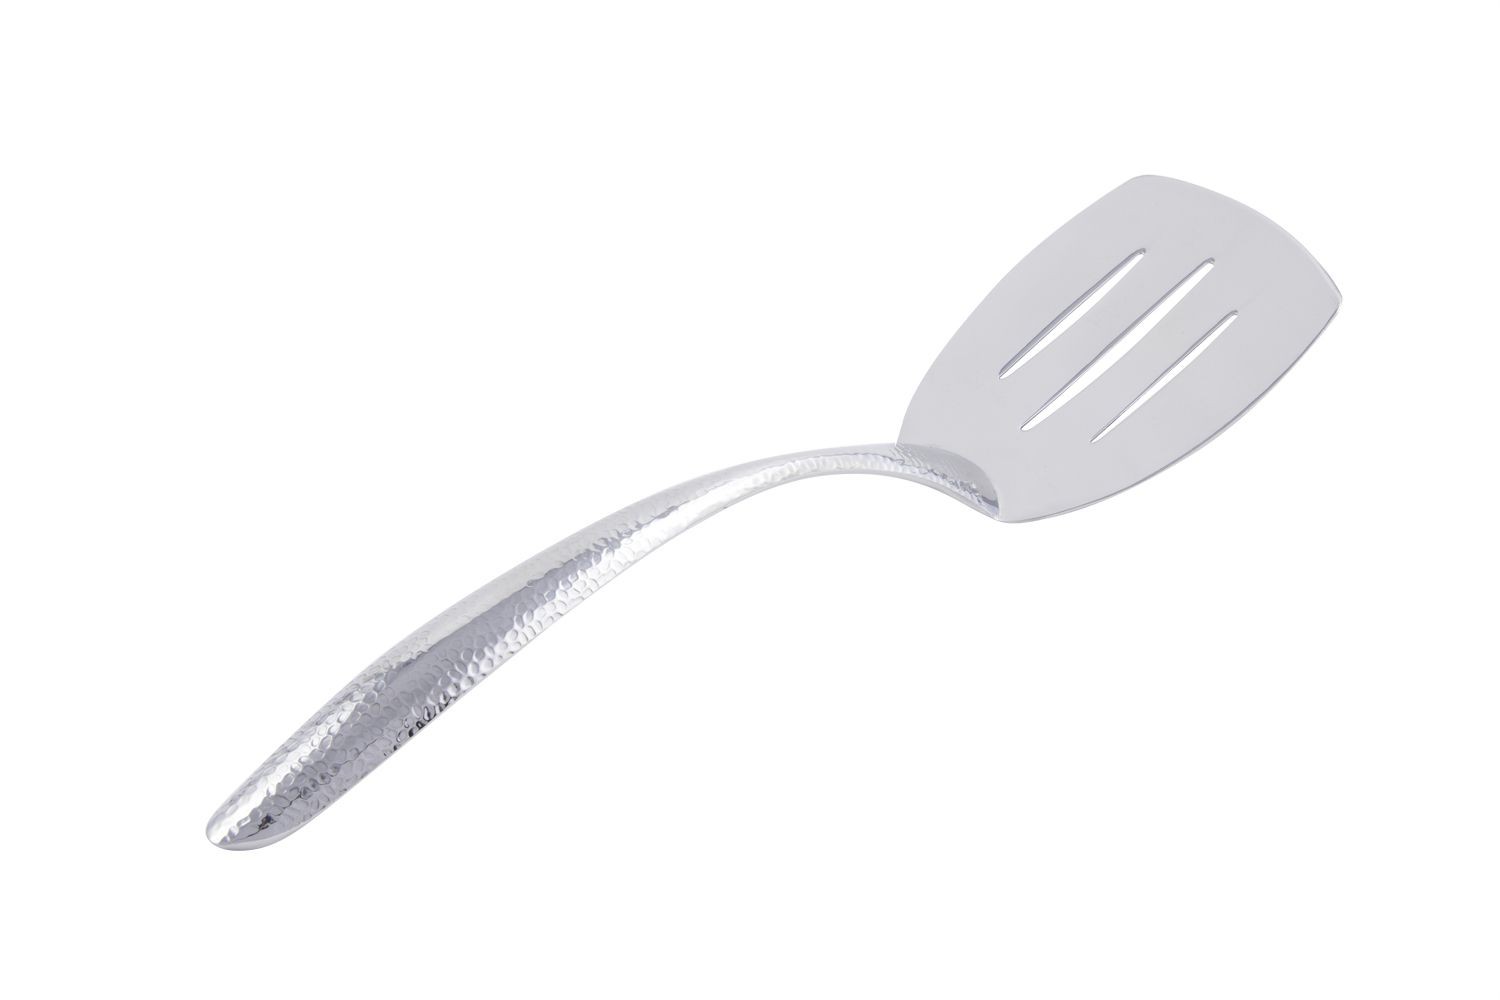 Bon Chef 9460HF EZ Use Banquet Serving Slotted Turner with Hammered Finish, 14 3/4"